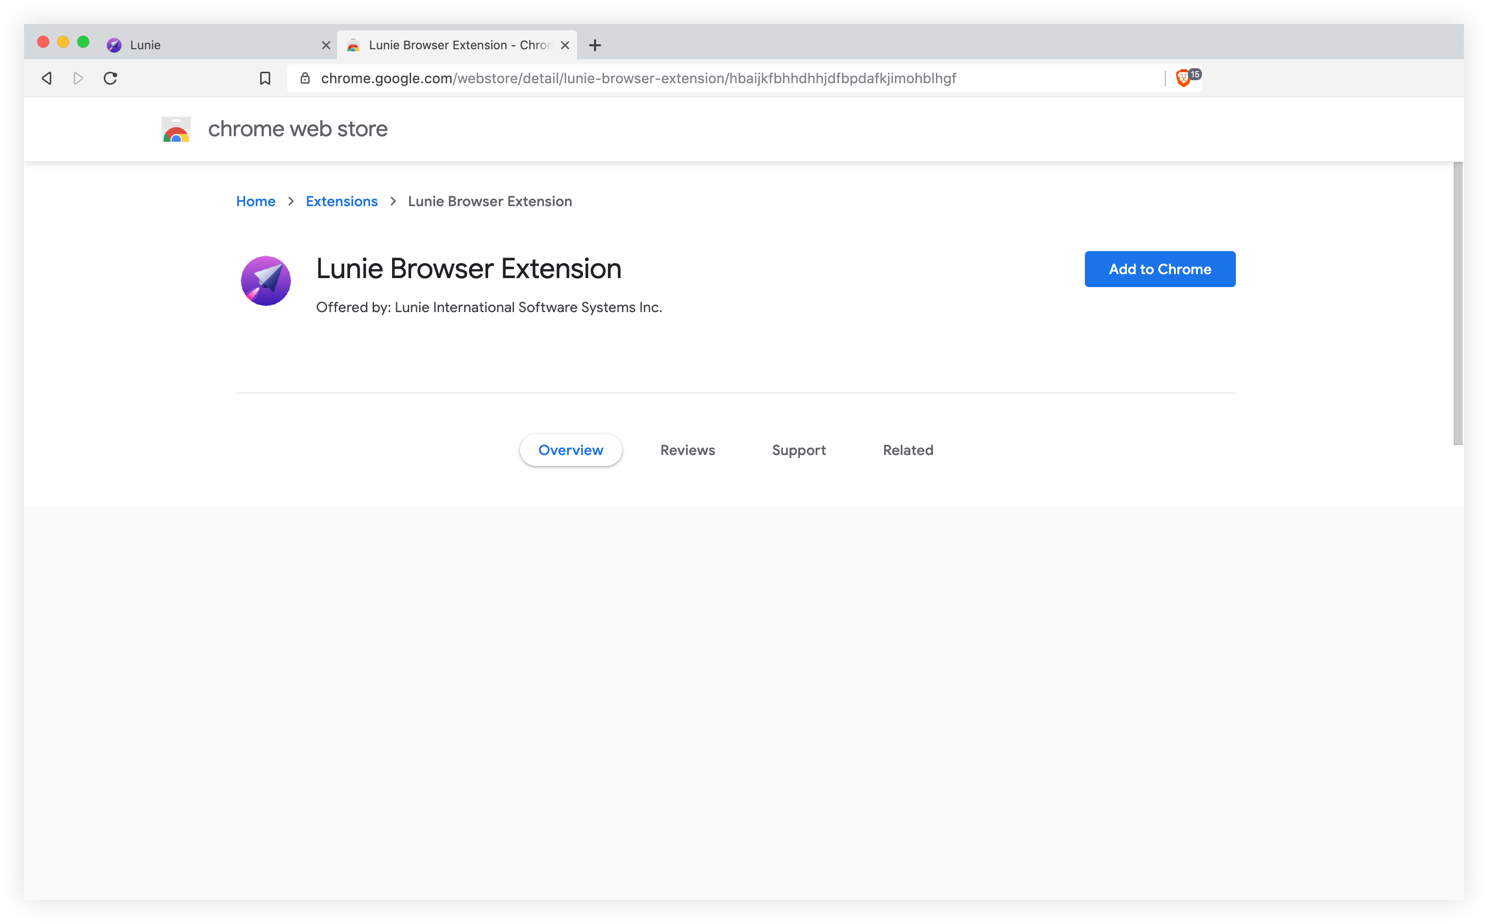 The Lunie browser extension page in the Chrome web store with a big “Add to Chrome” button